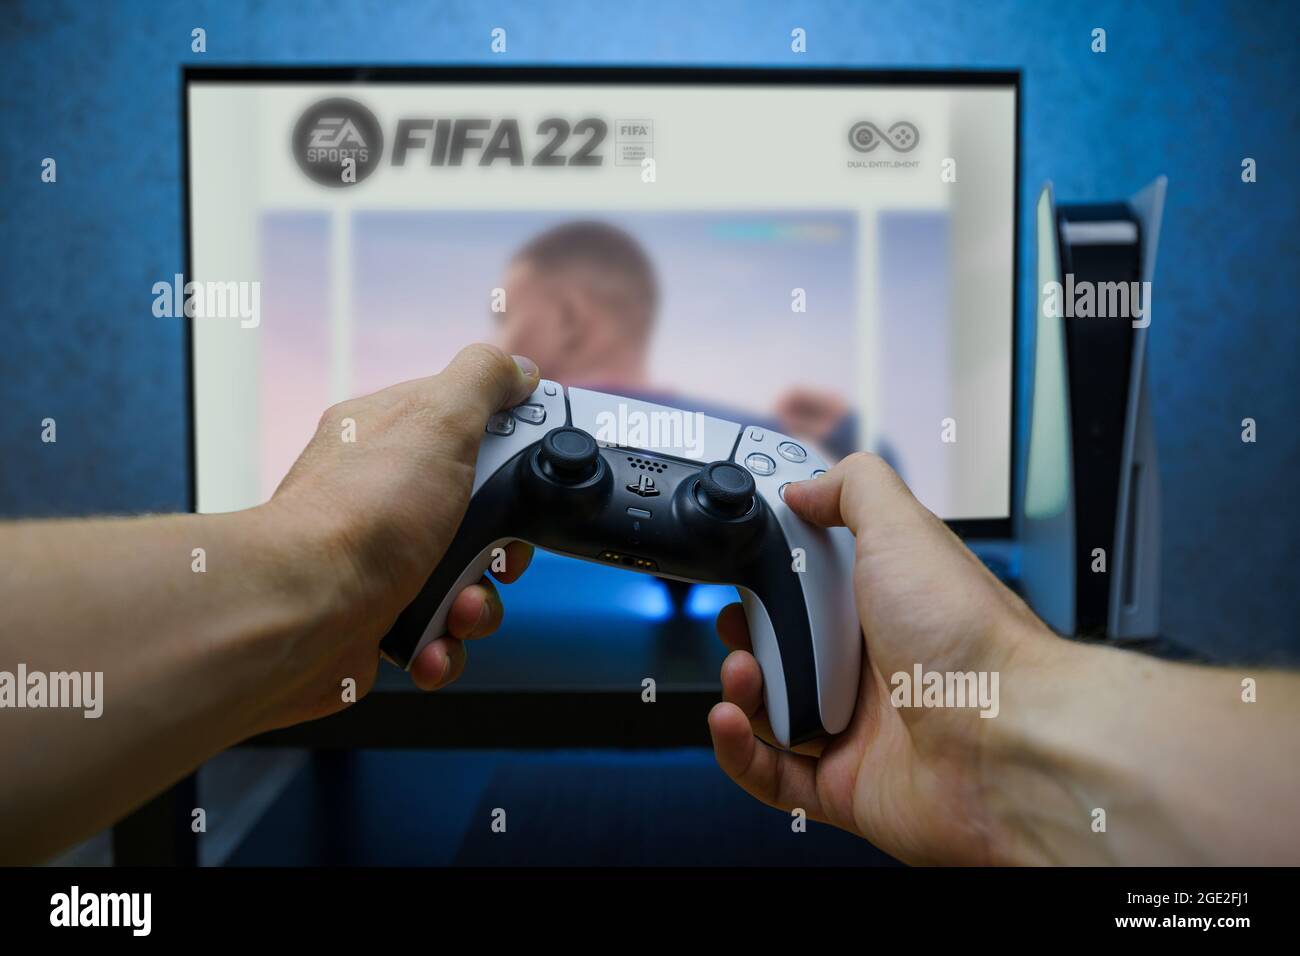 Fifa 2022 video game on new generation Sony Playstation 5 video console.  Point of view shot Stock Photo - Alamy